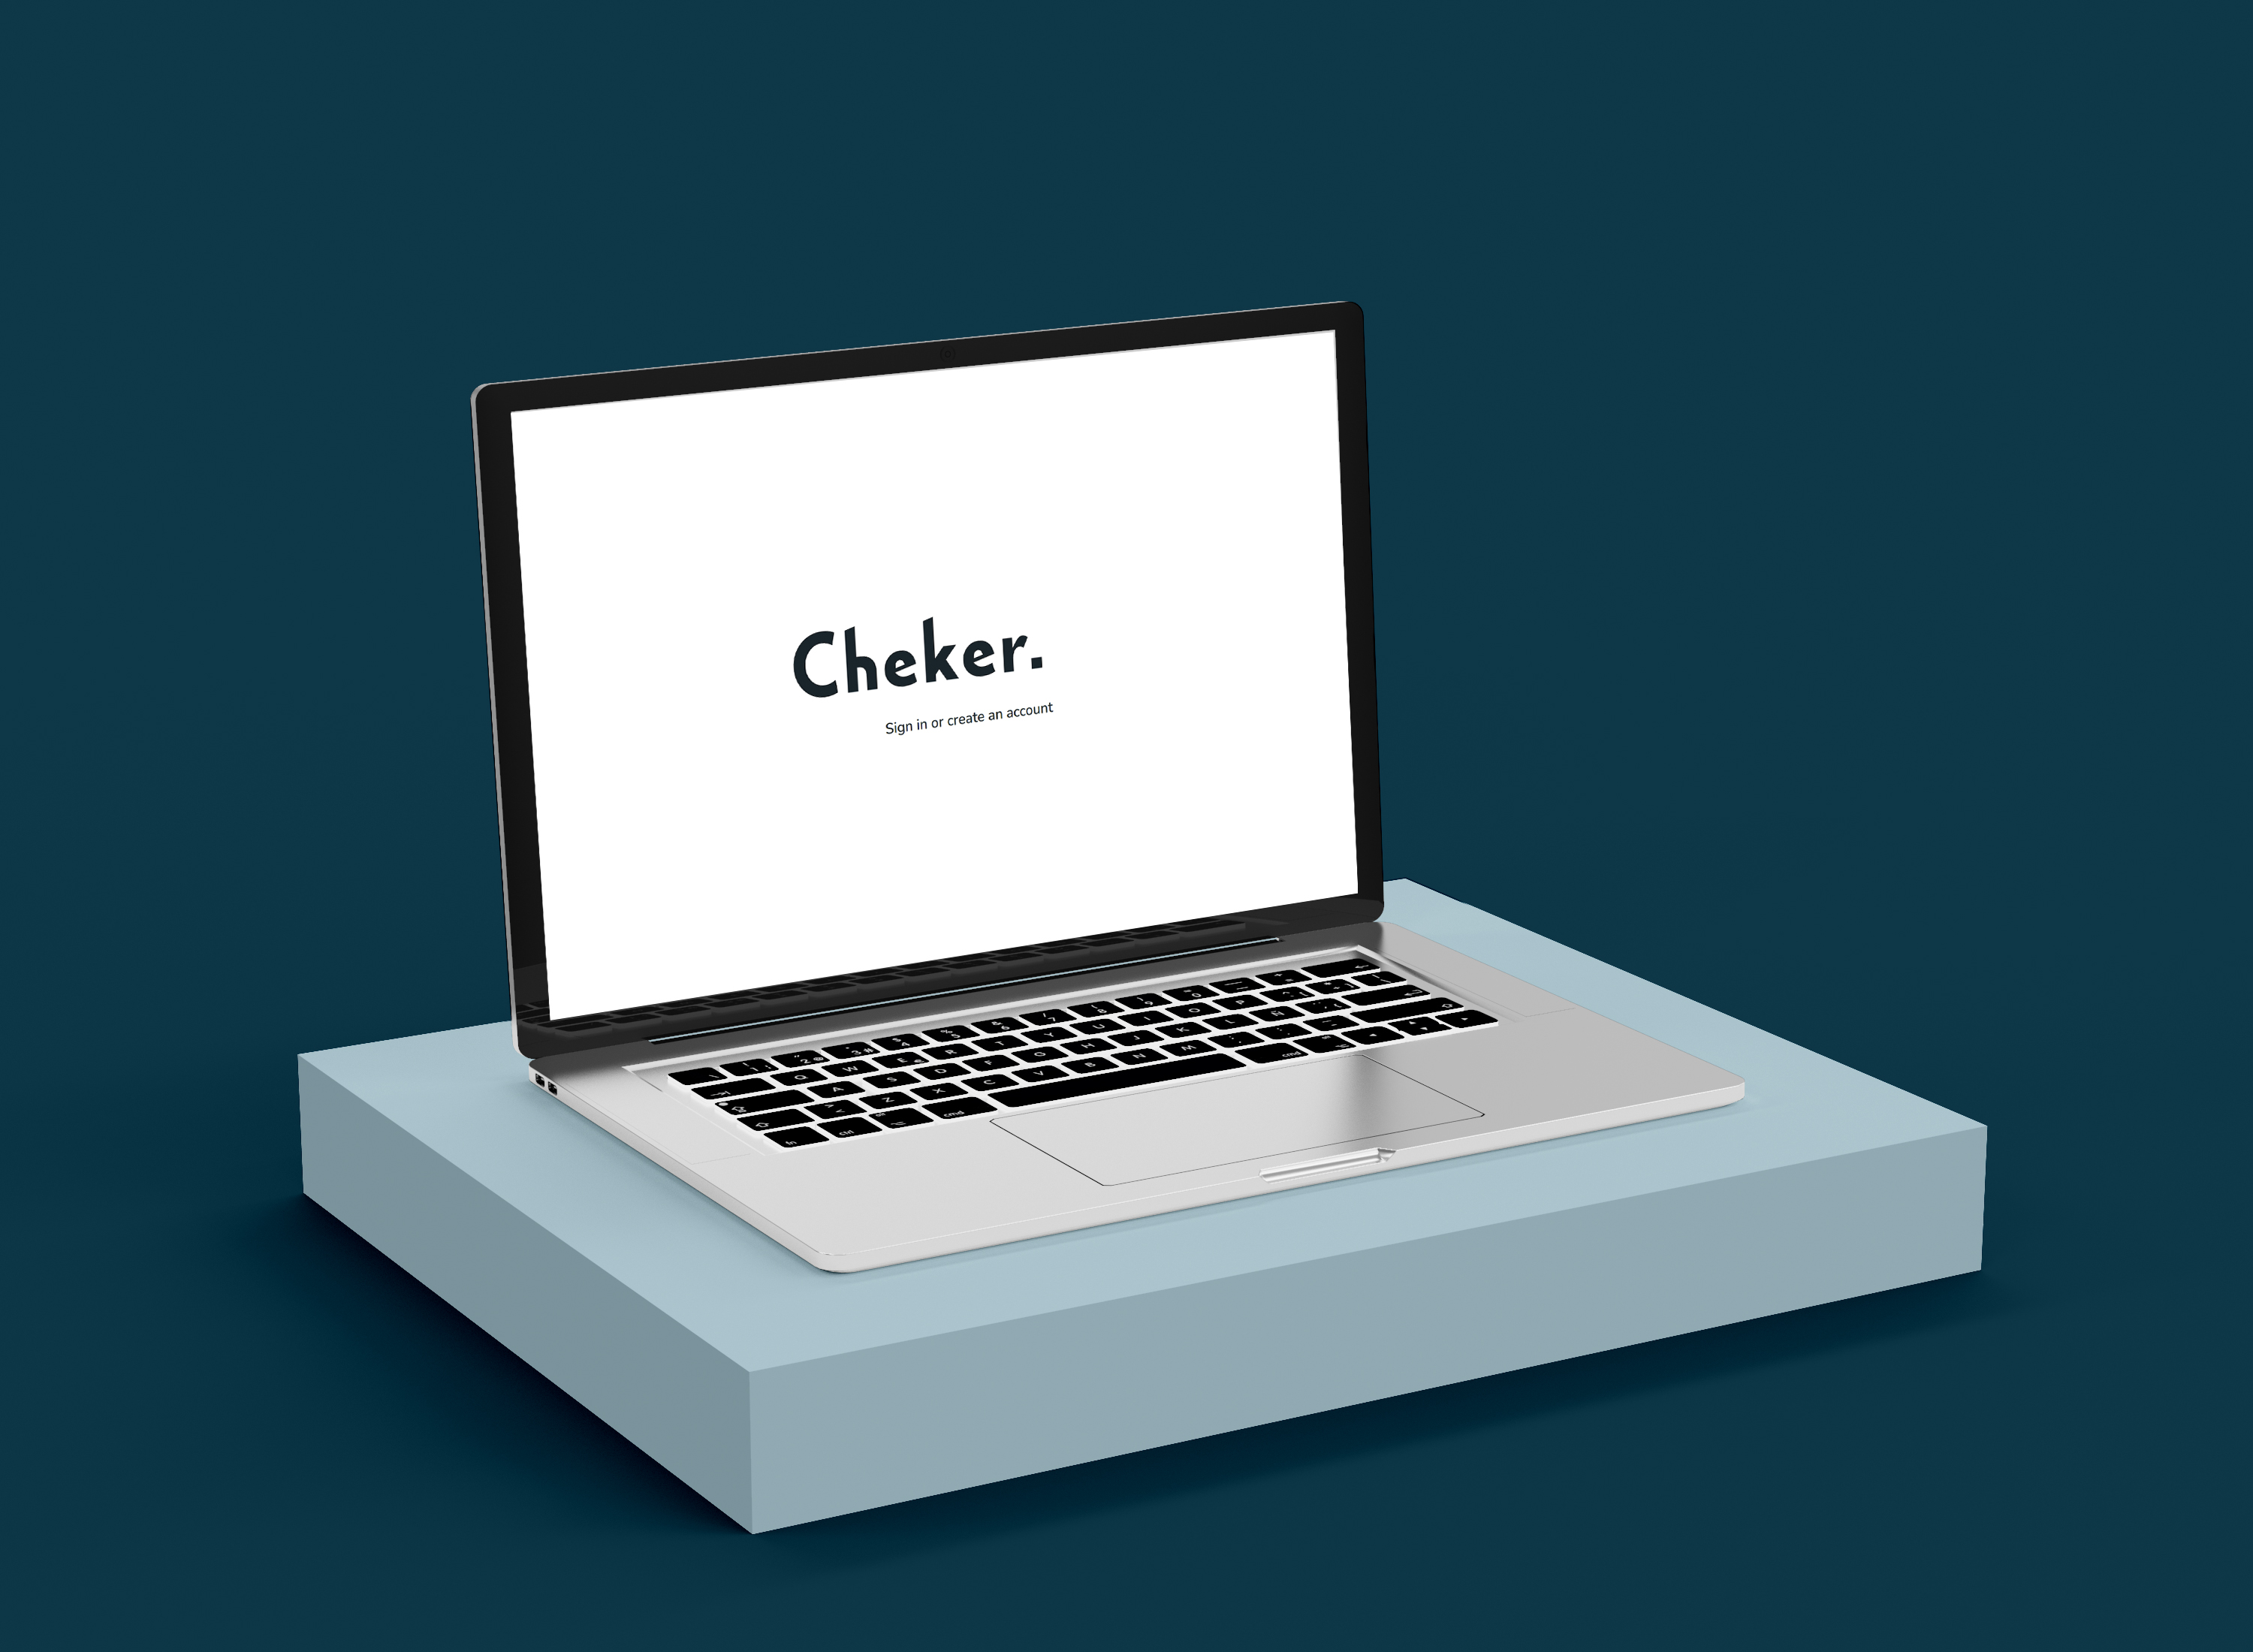 Laptop on stand showing Cheker software.